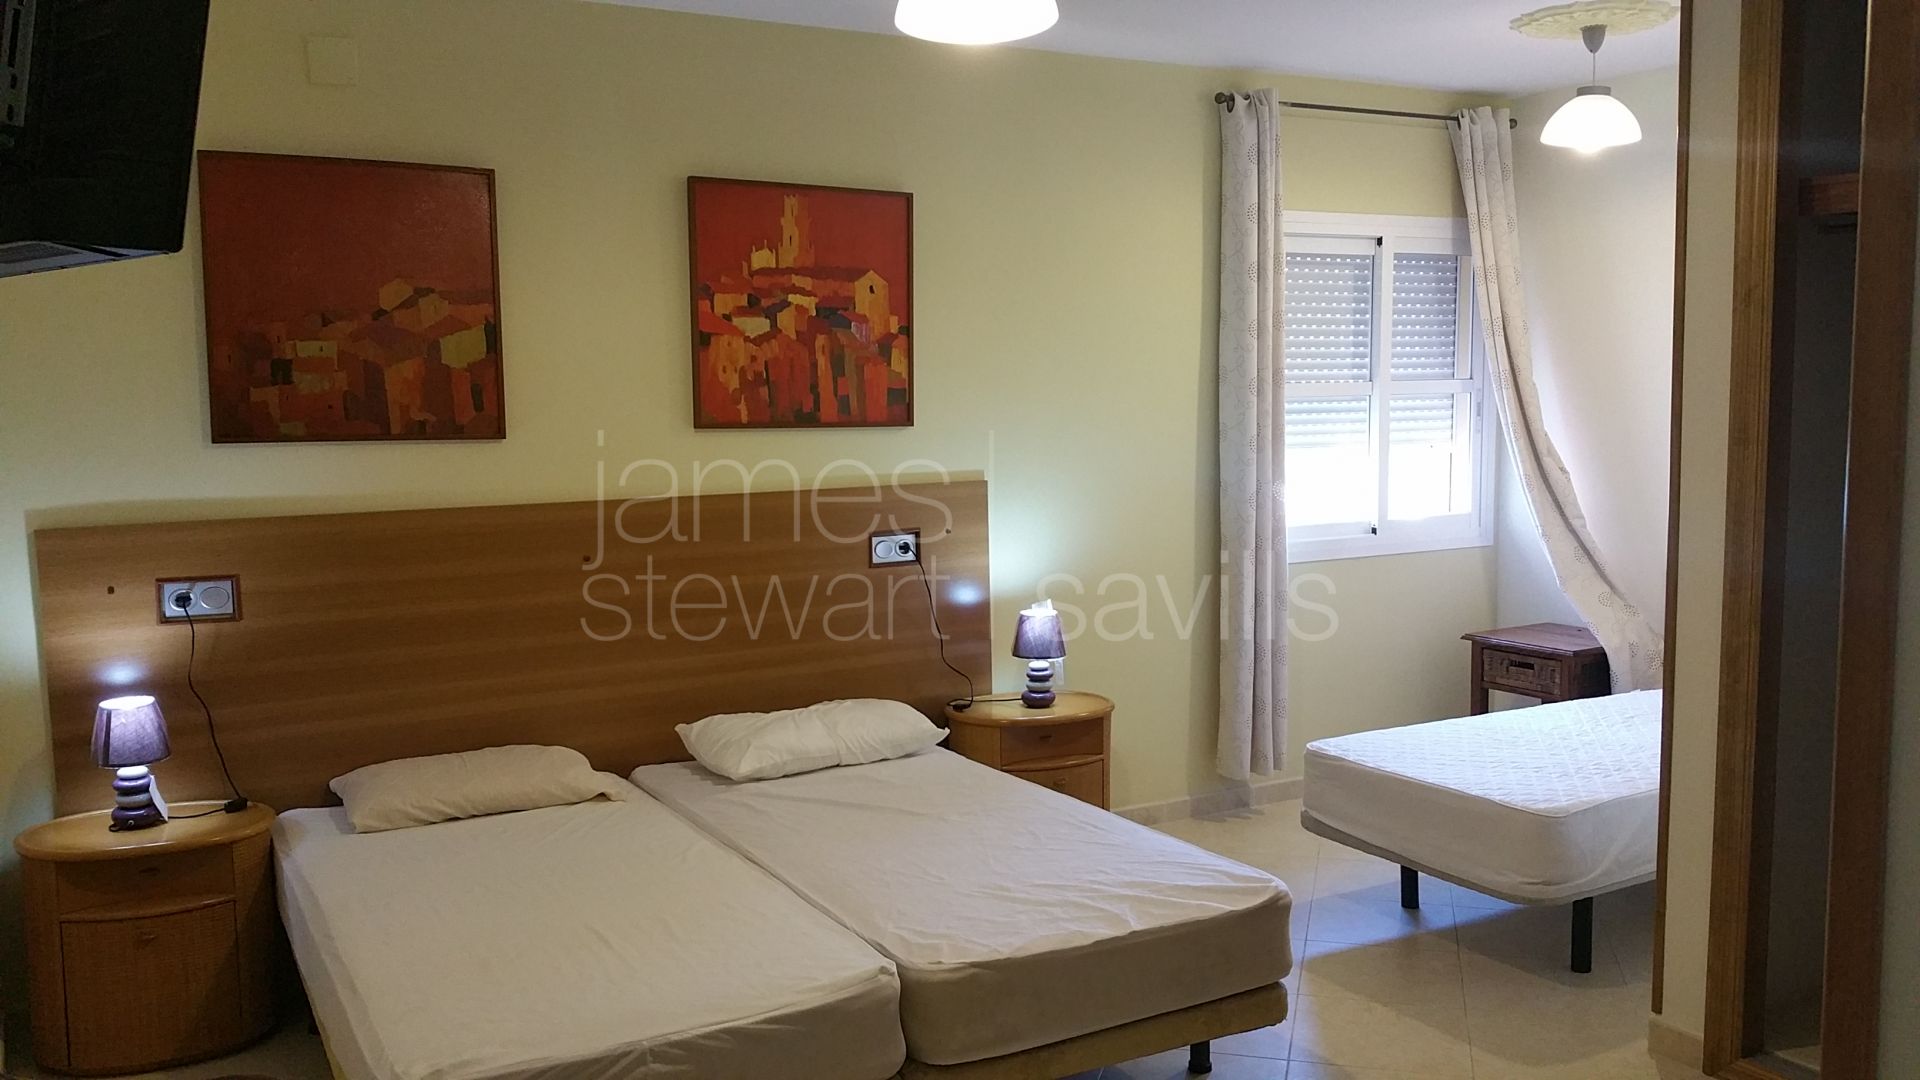 22 bedroom hostal in the heart of the commercial centre of Sotogrande